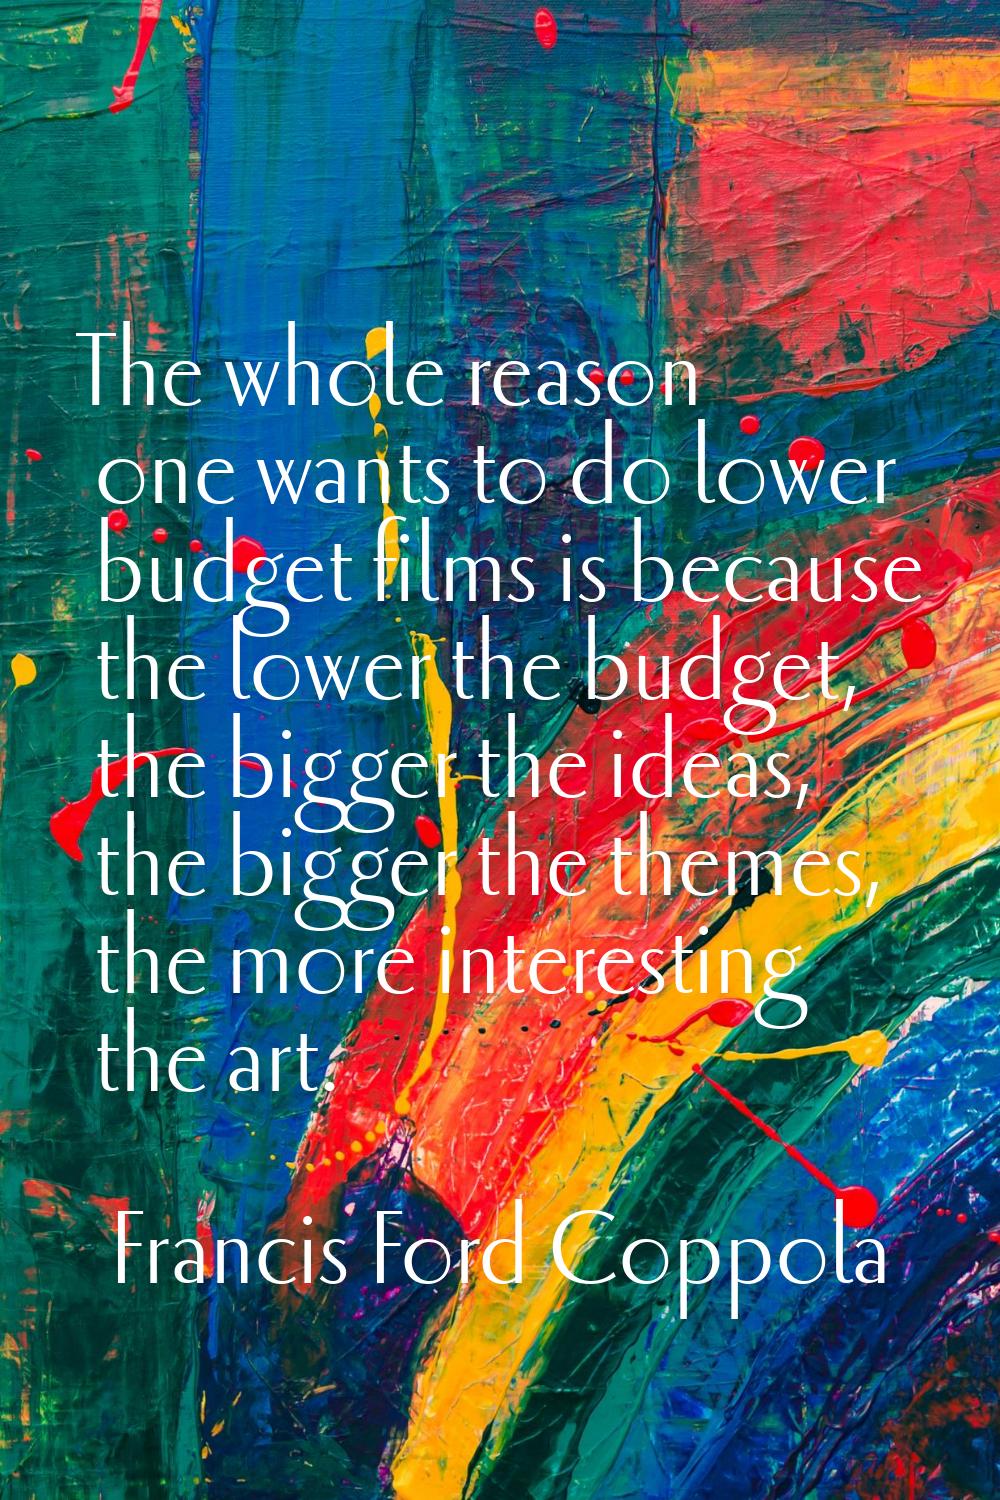 The whole reason one wants to do lower budget films is because the lower the budget, the bigger the